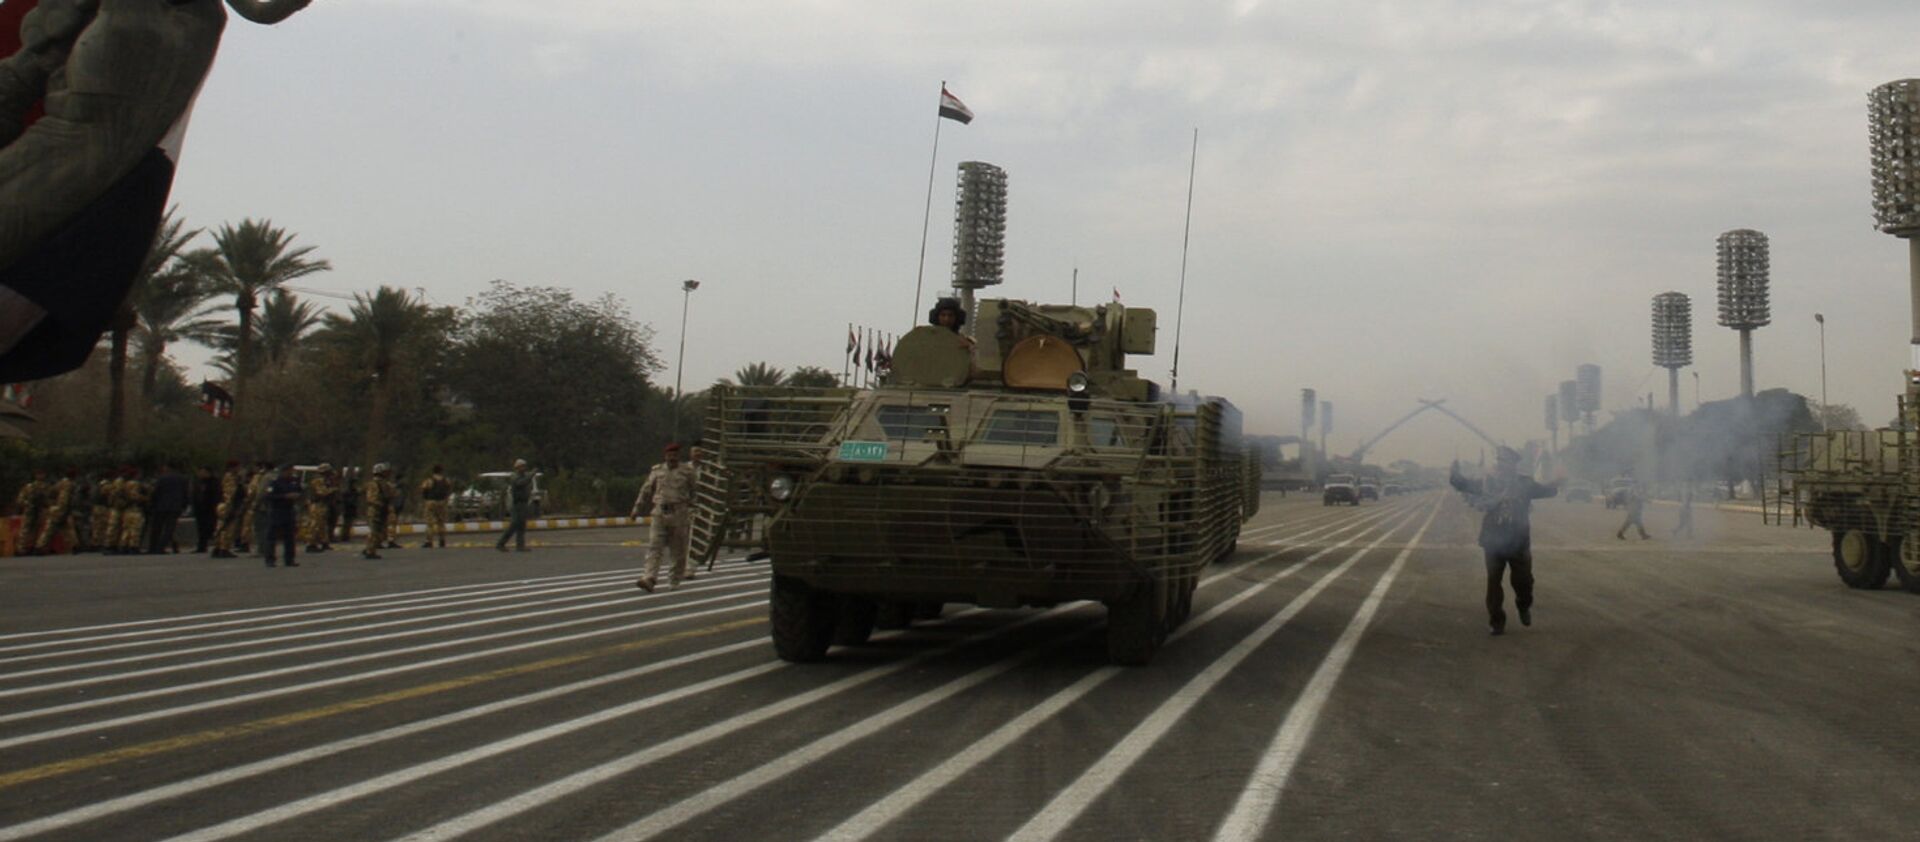 Iraqi army military vehicles march under the victory Arch landmark during a parade to mark the 91st Army Day in Baghdad on January 6, 2012, weeks after US troops completed their pullout - Sputnik International, 1920, 25.07.2021